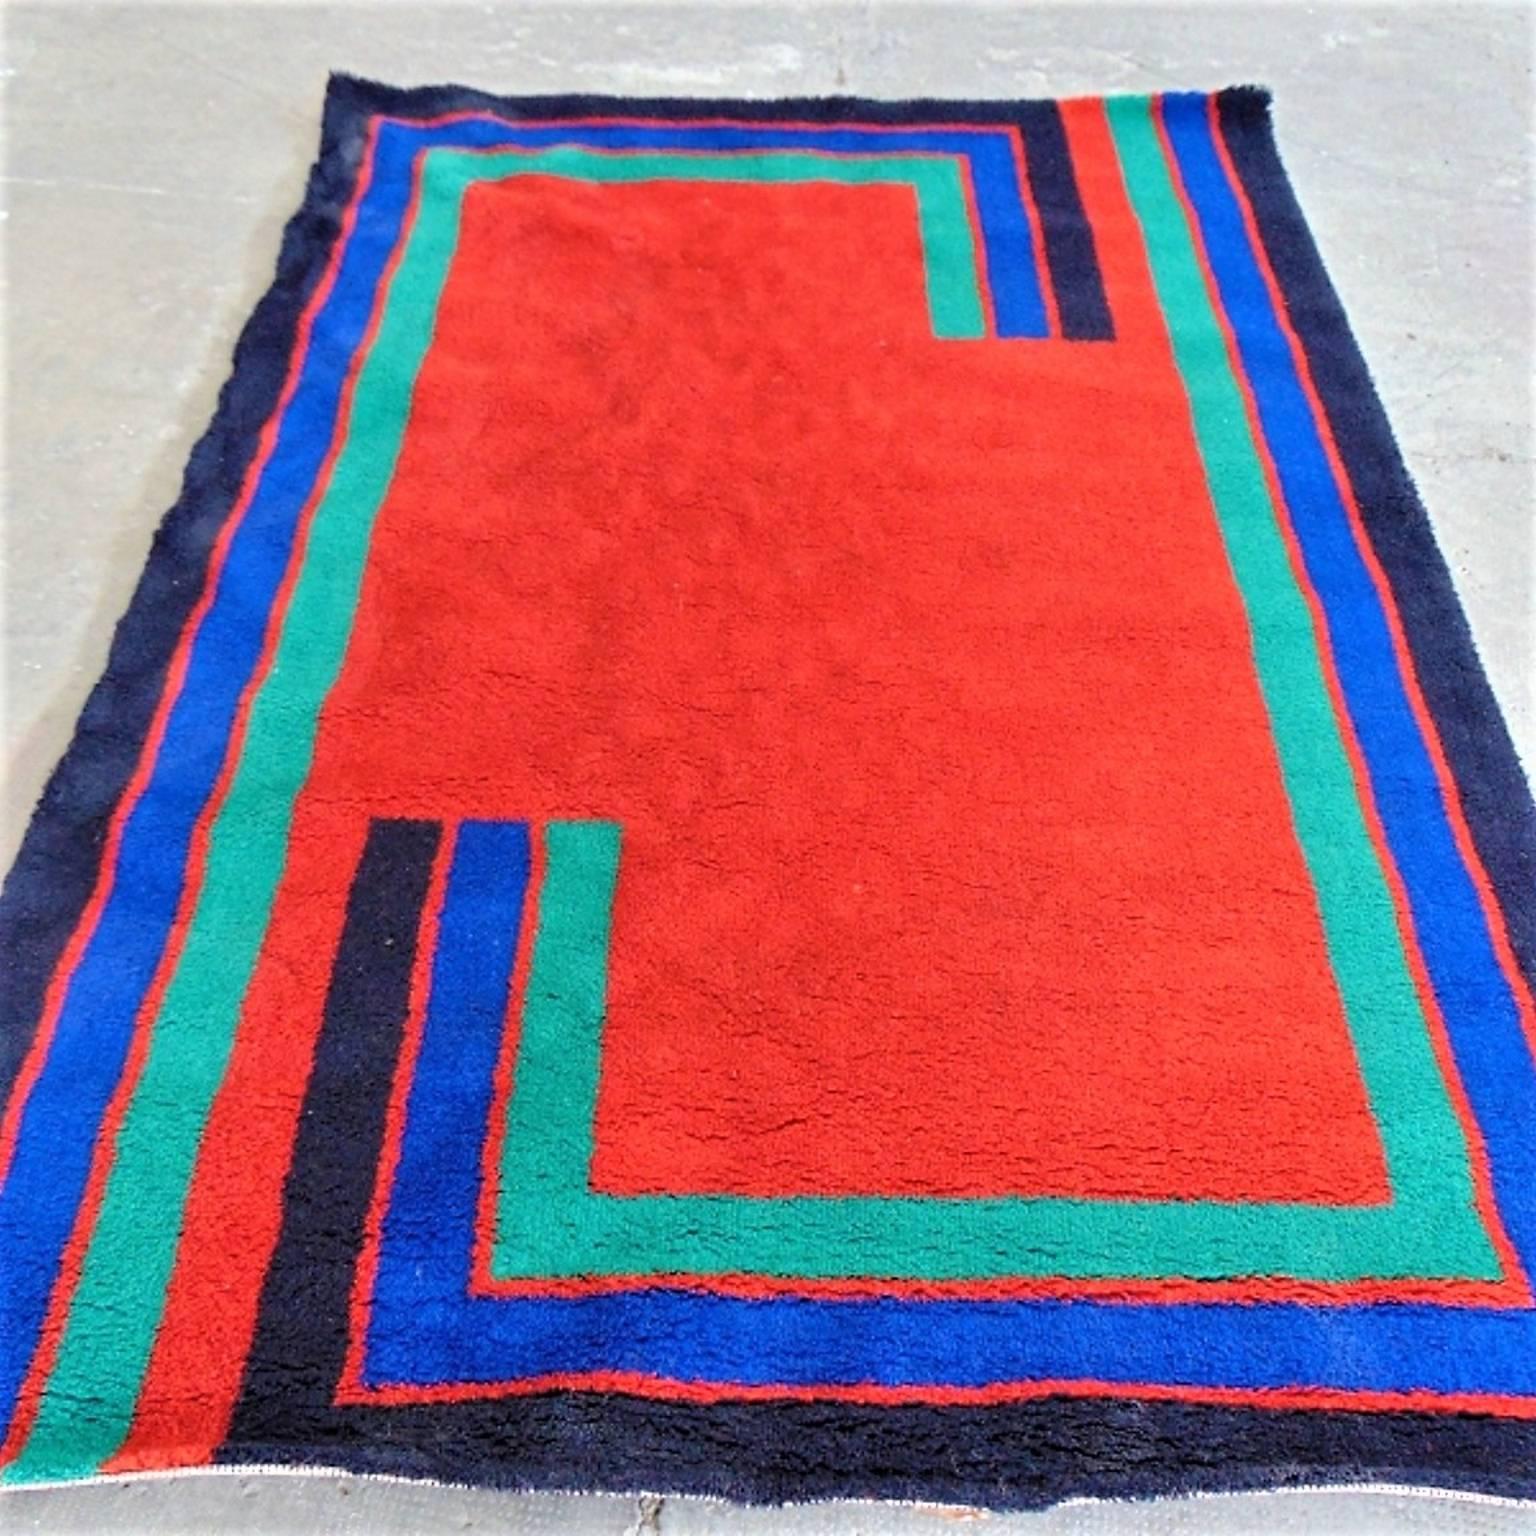 Pure new wool geometric carpet with the famous technique created by Marguerite Rye.
Color combination: dominating color is red, with geometric stripes around the carpet in dark blue, China blue and turquoise.
The carpet is a bit wavy, but with a